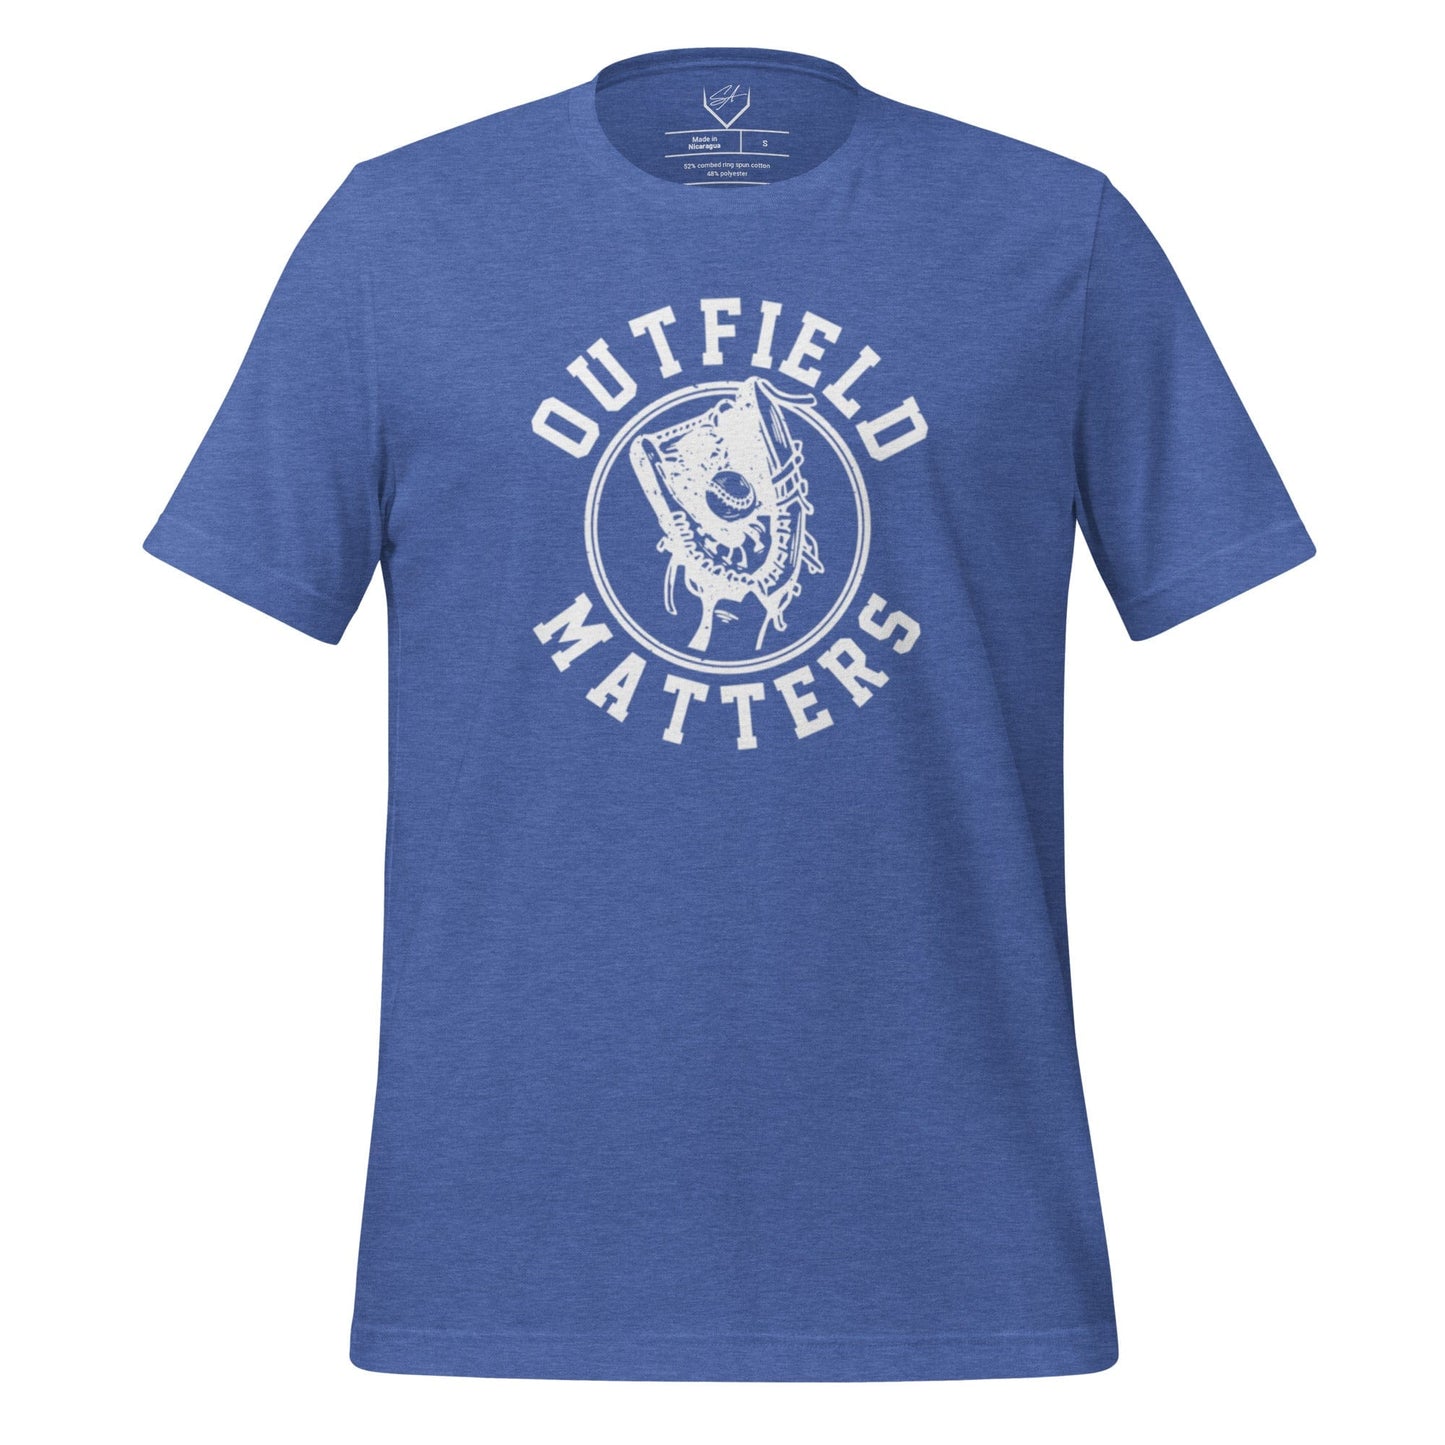 Outfield Matters - Adult Tee